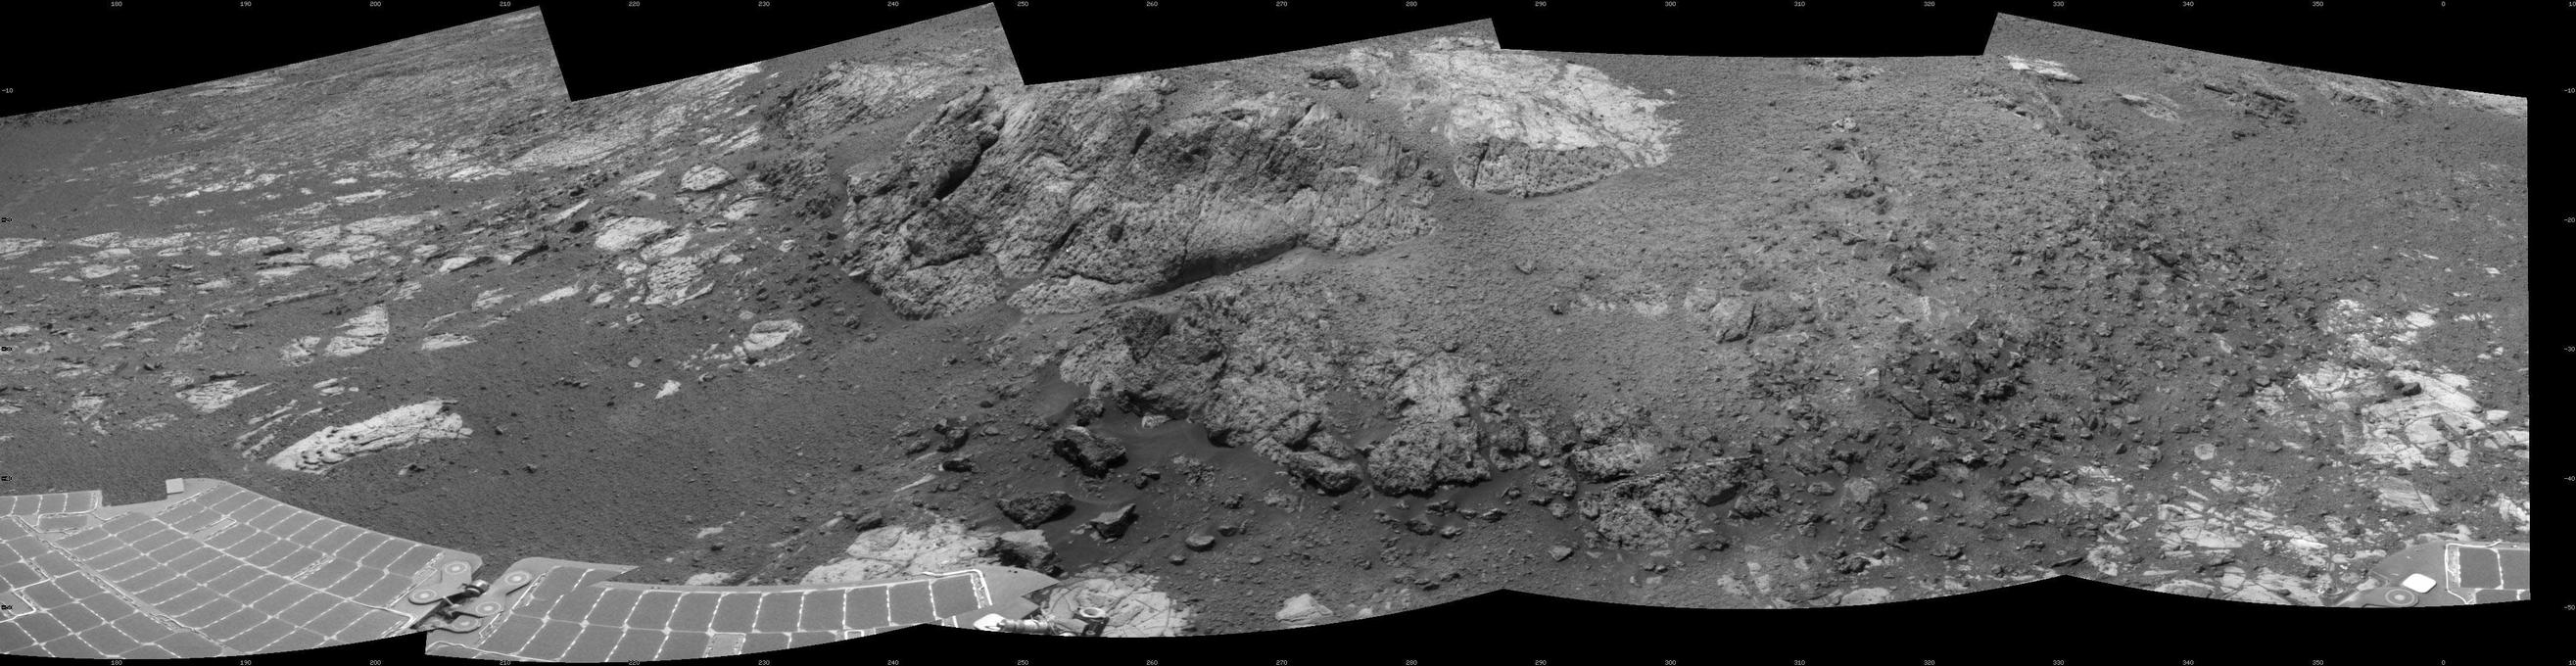 This 180-degree mosaic of images from the navigation camera on the NASA Mars Exploration Rover Opportunity shows terrain near the rover during the 3,153rd Martian day, or sol, of the rover's work on Mars (Dec. 6, 2012).